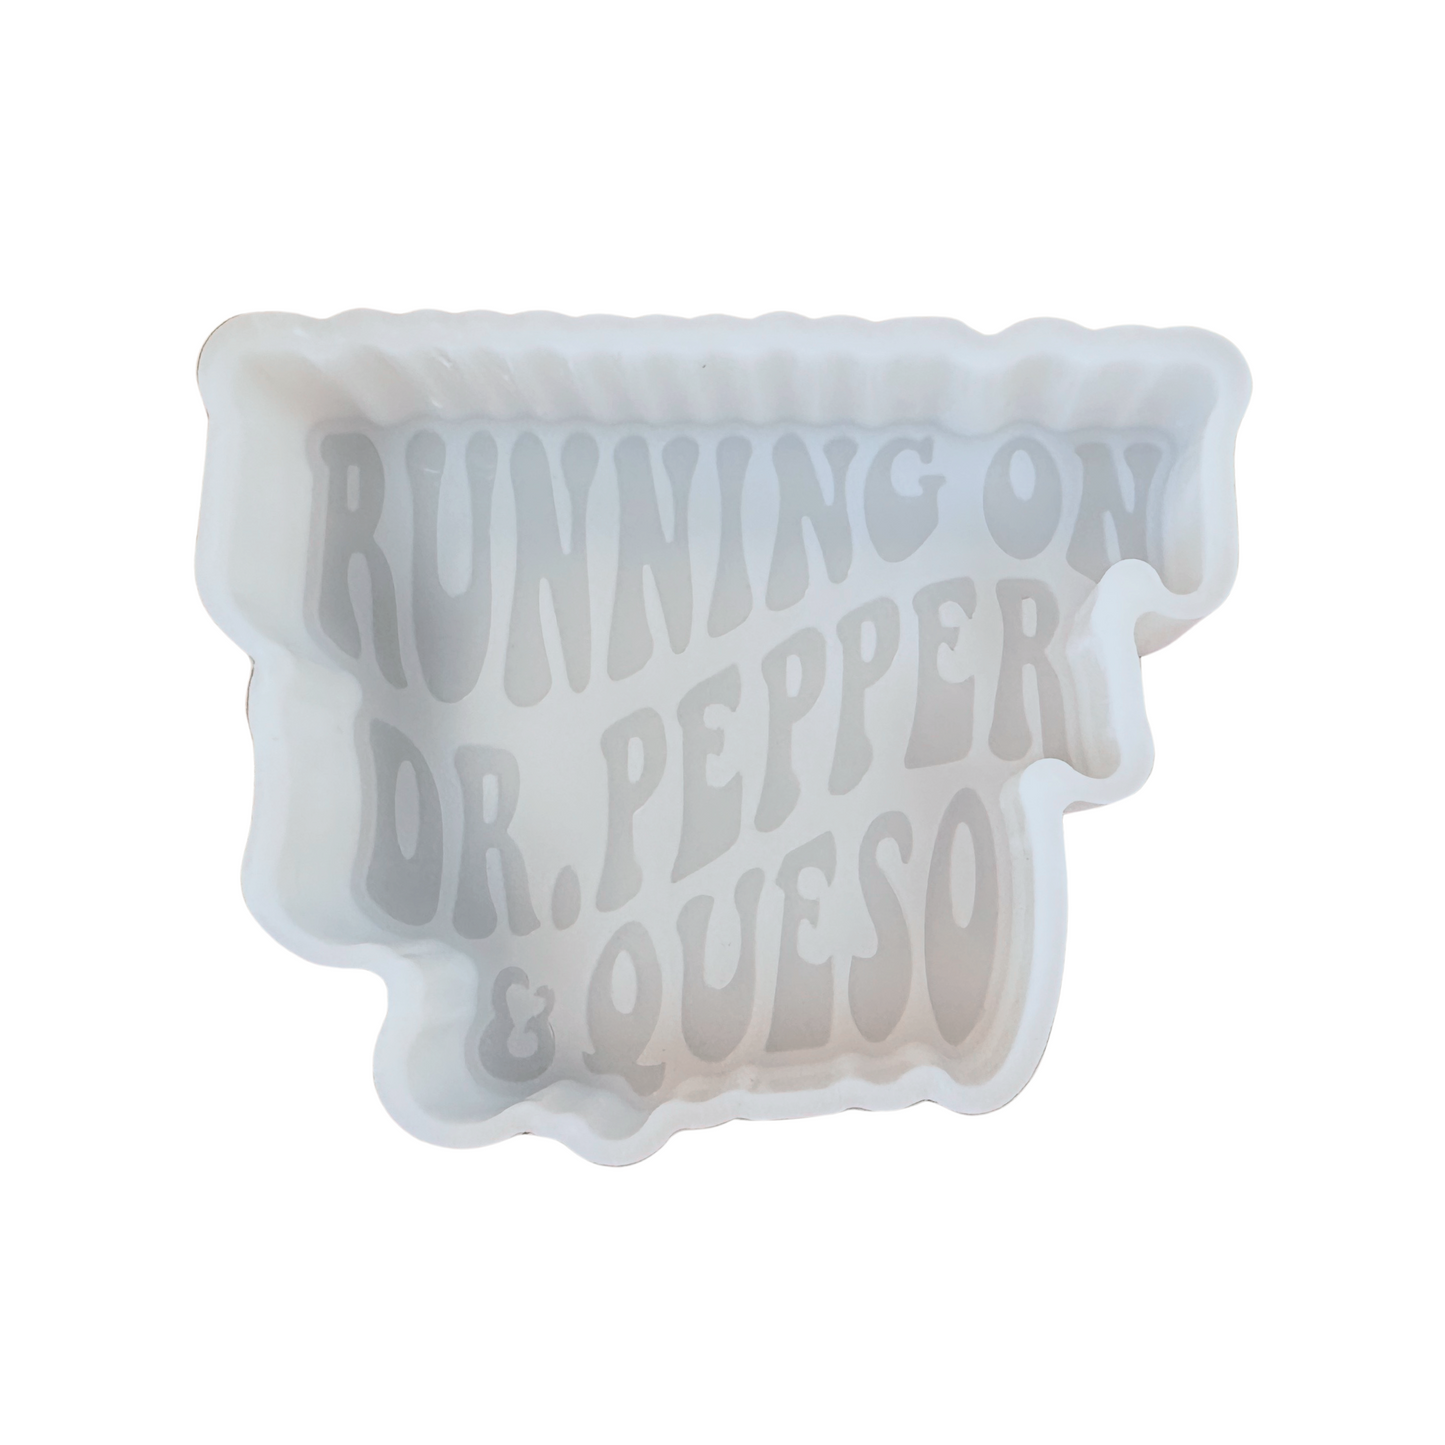 Running on Dr P & Queso Silicone Mold 3 x 4 x 0.8”